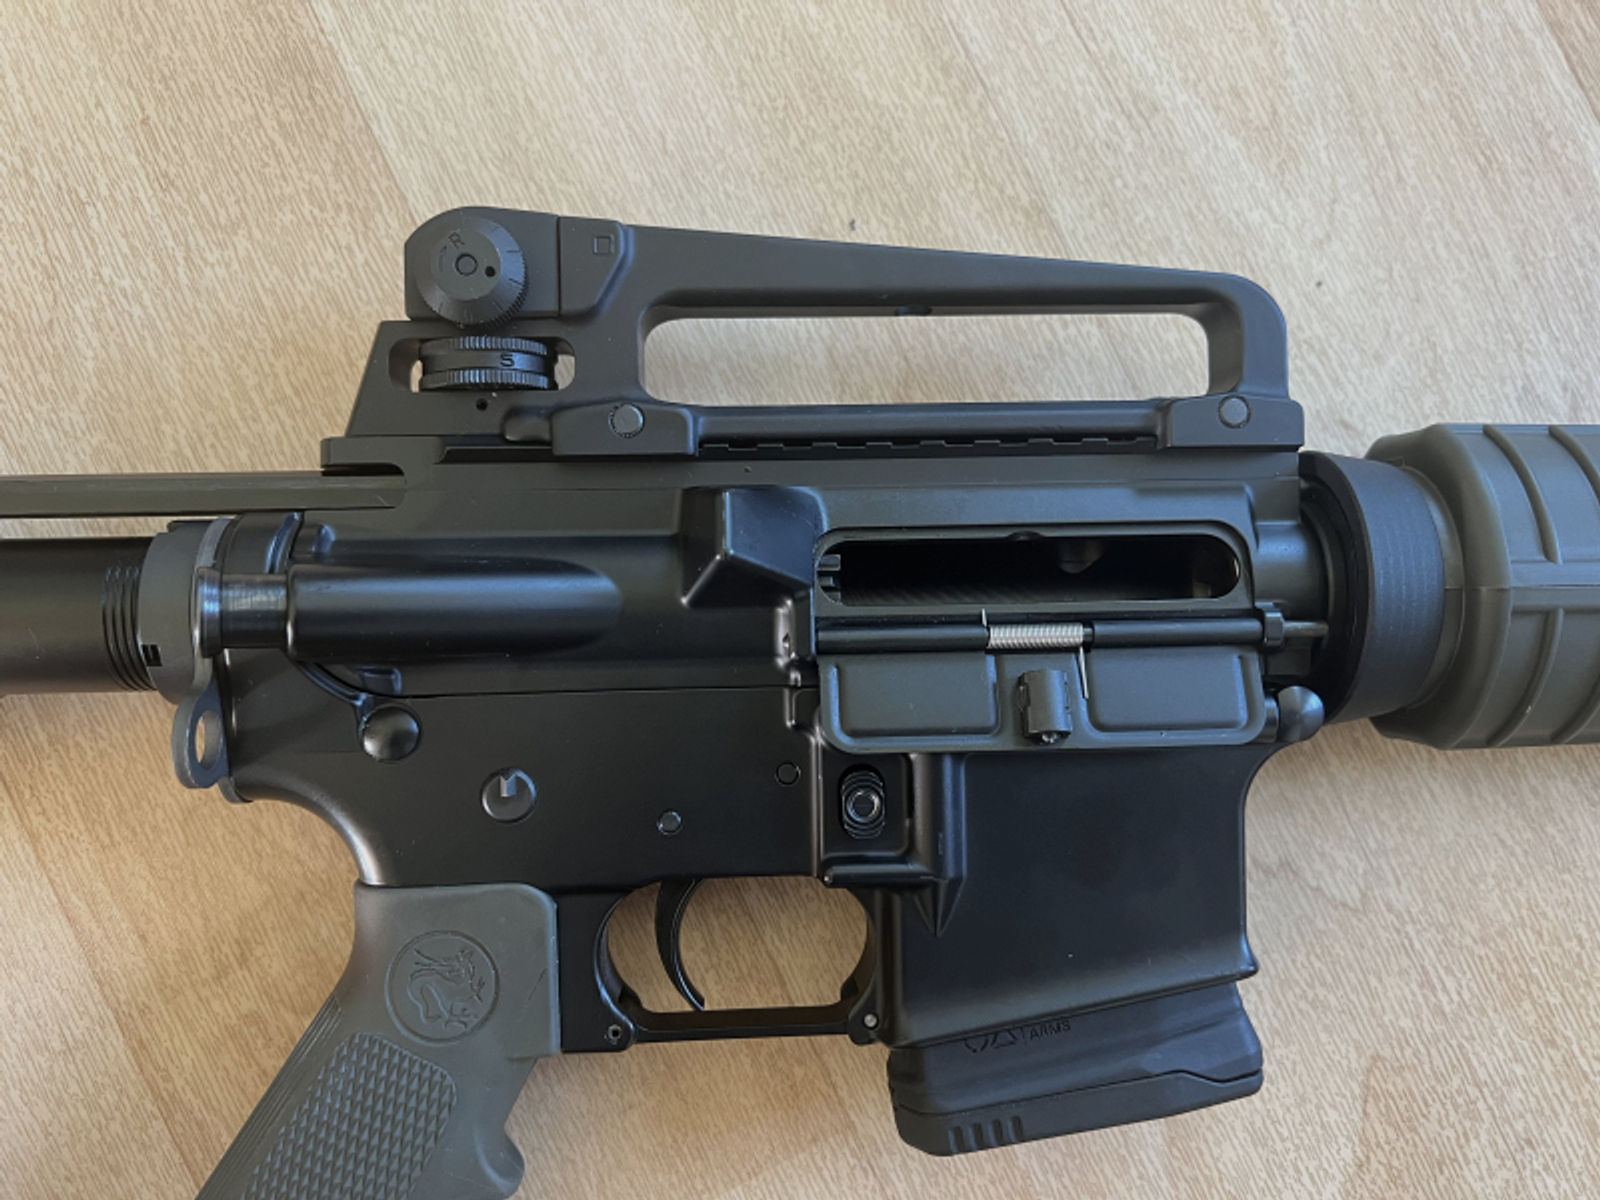 OBERLAND ARMS Repetierbüchse OA-GZR "AR15" .223REM WBK GELB! TOP!!!